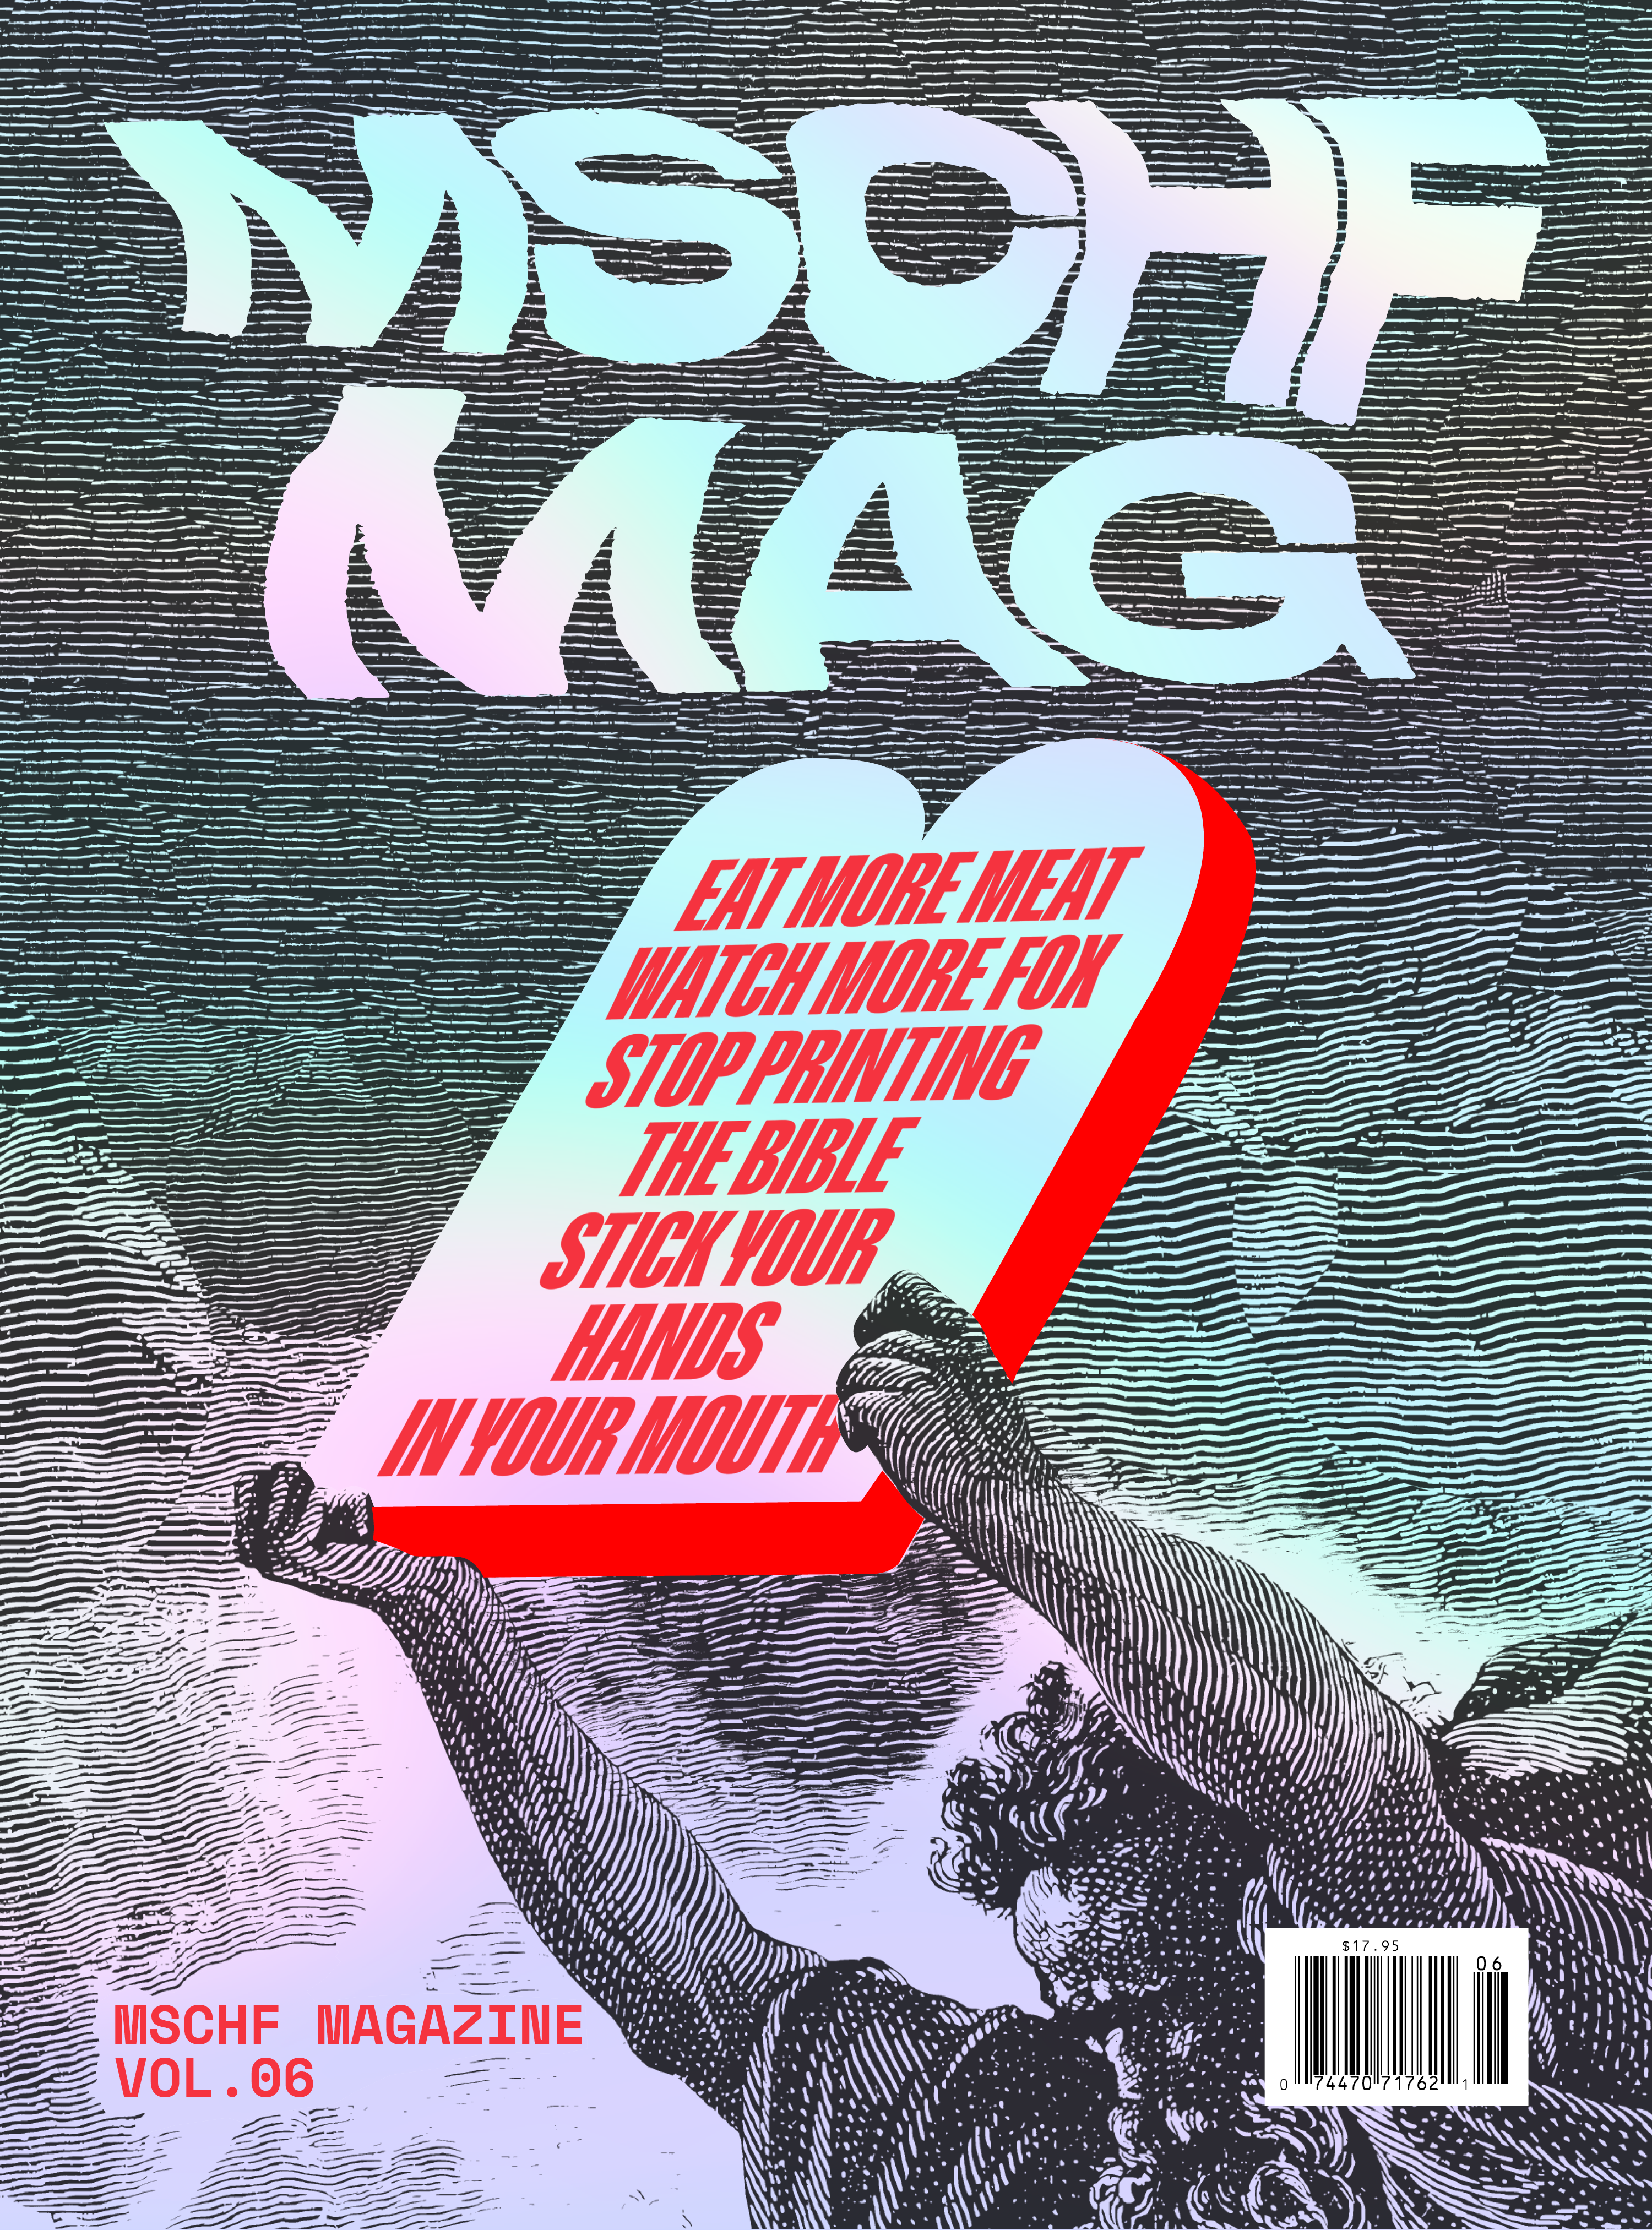 MSCHF MAG VOL 6: EAT MORE MEAT WATCH MORE FOX STOP PRINTING THE BIBLE STICK  YOUR HANDS IN YOUR MOUTH US